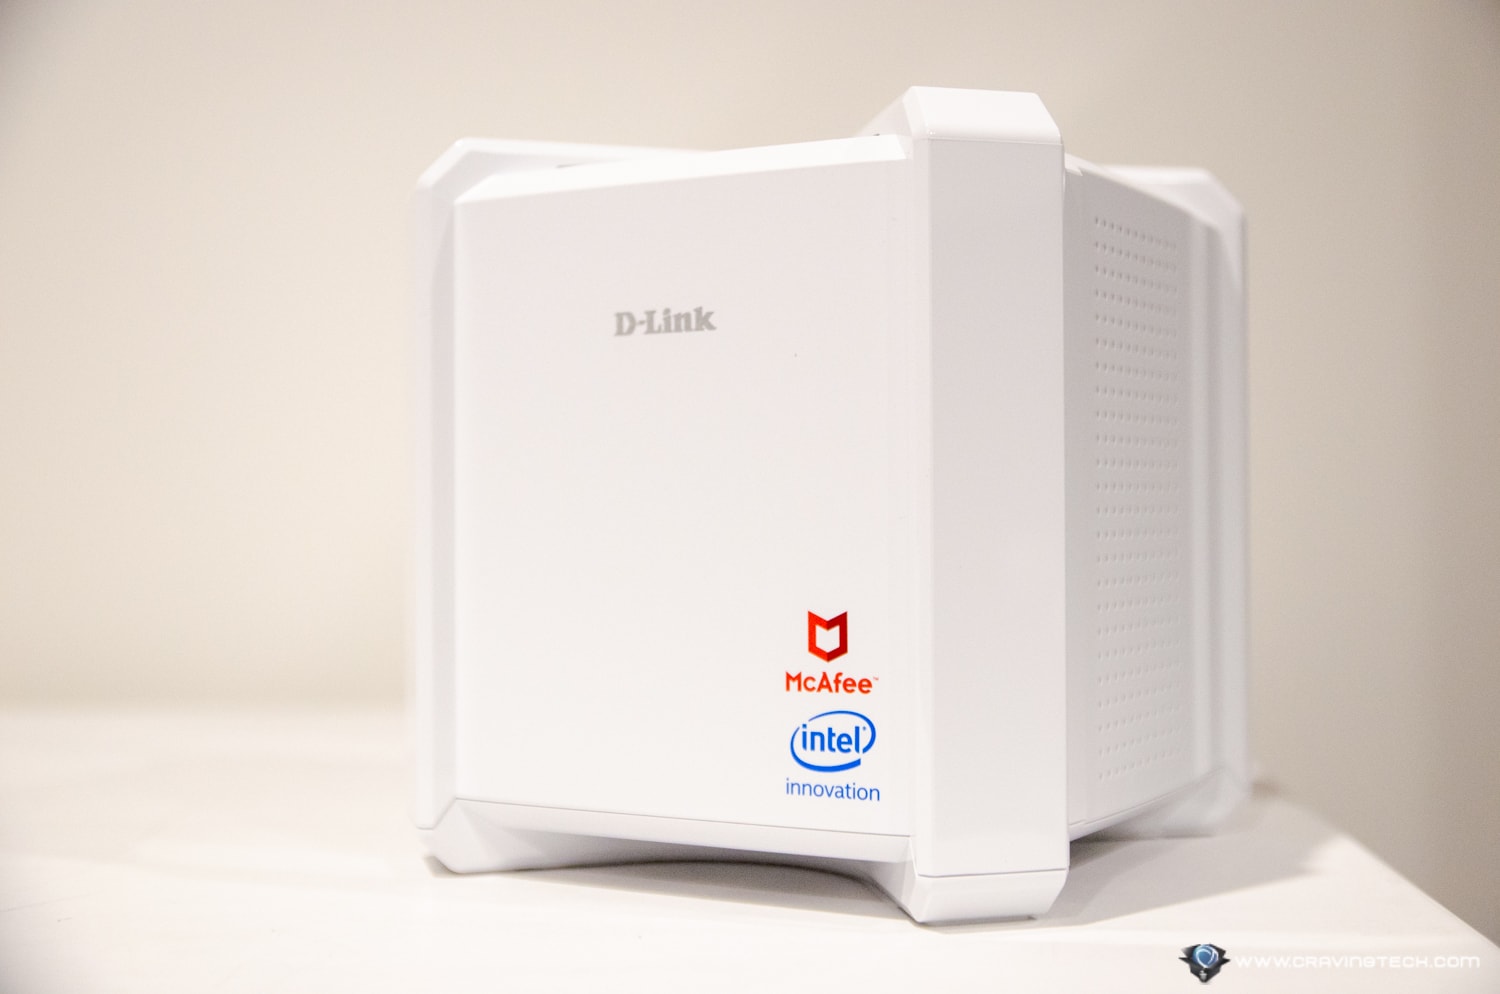 D-Link D-Fend Router Review Packaging